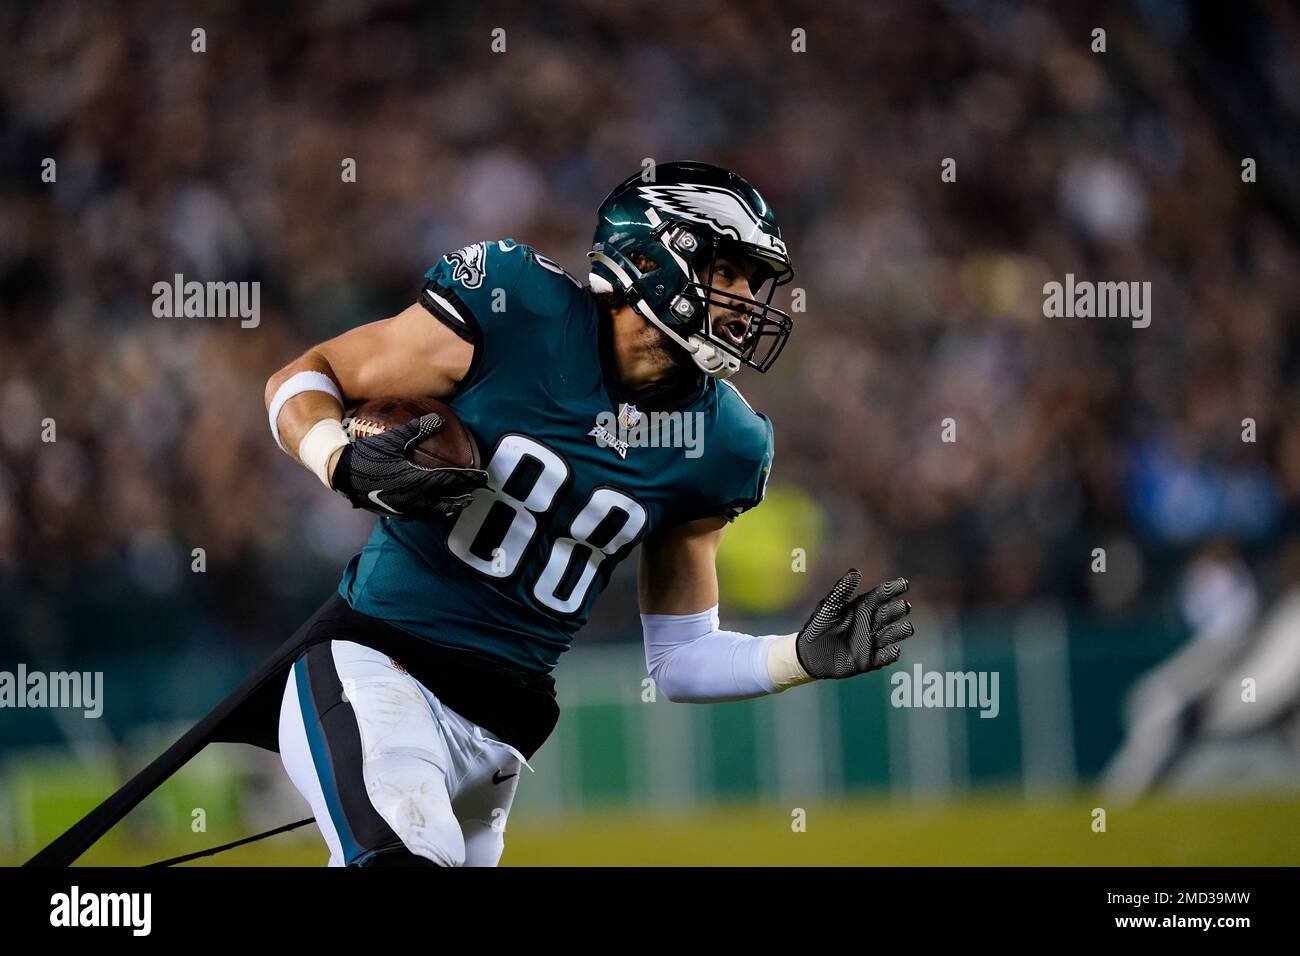 Philadelphia Eagles tight end Dallas Goedert (88) has his jersey ripped  during the second half of an NFL football game against the Los Angeles  Chargers on Sunday, Nov. 7, 2021, in Philadelphia. (